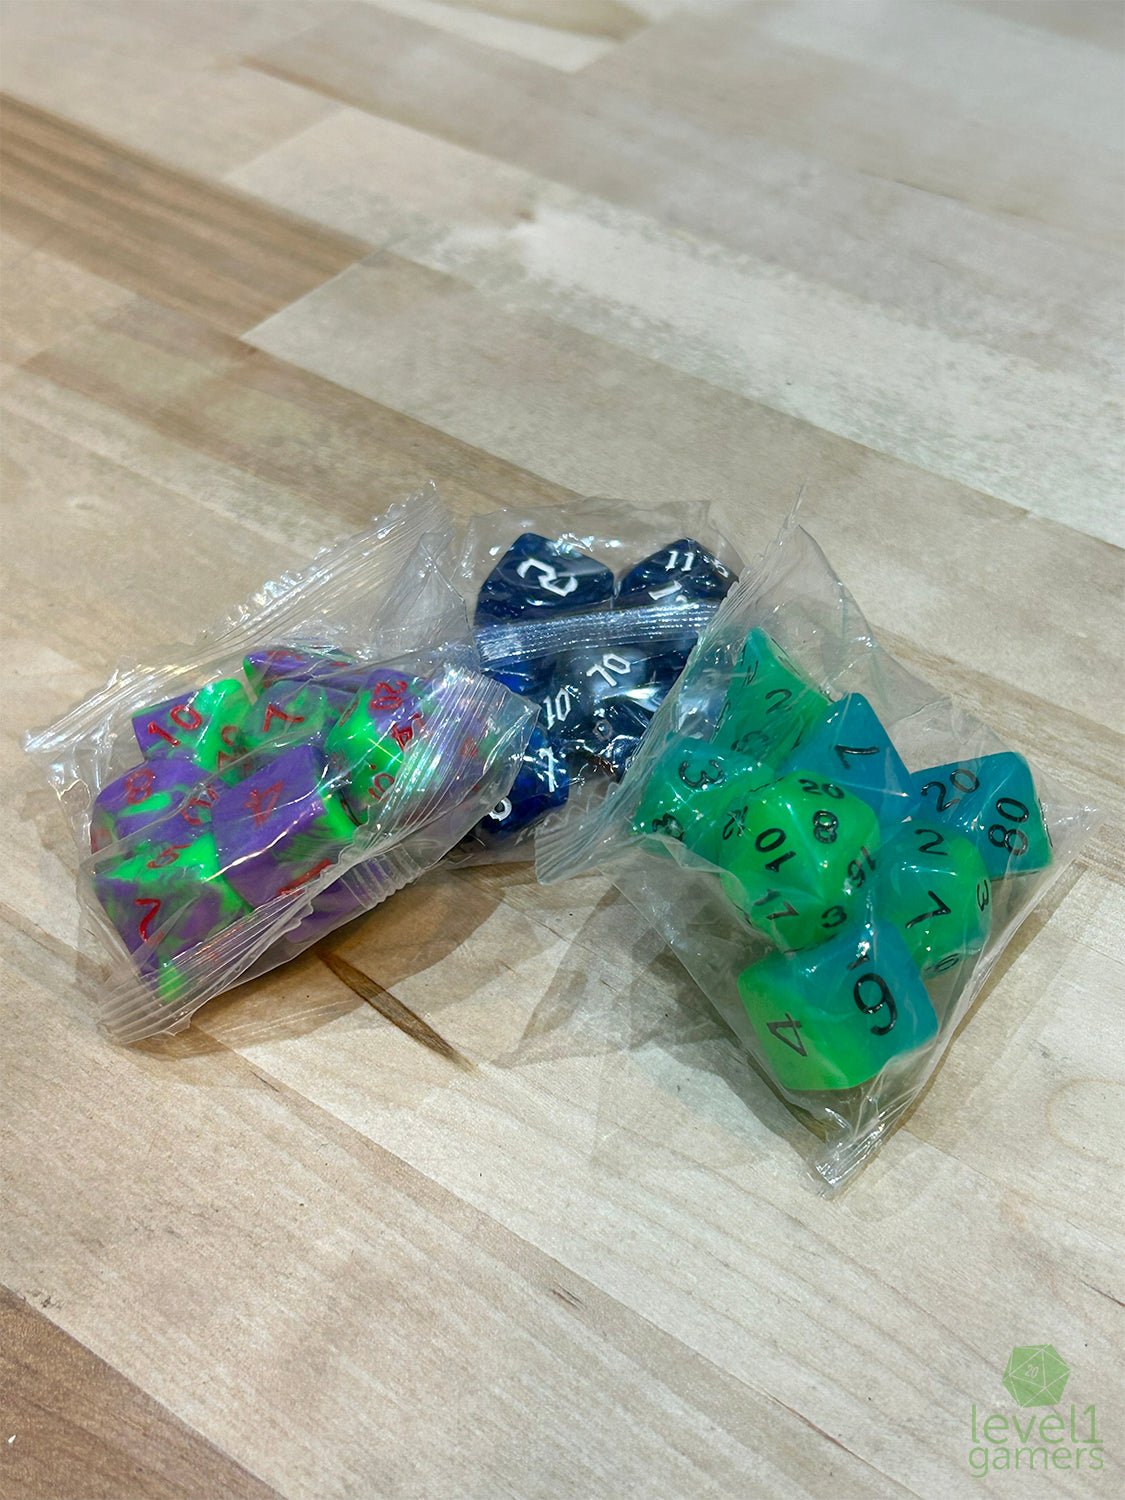 Mystery Dice Box Dice Level 1 Gamers   